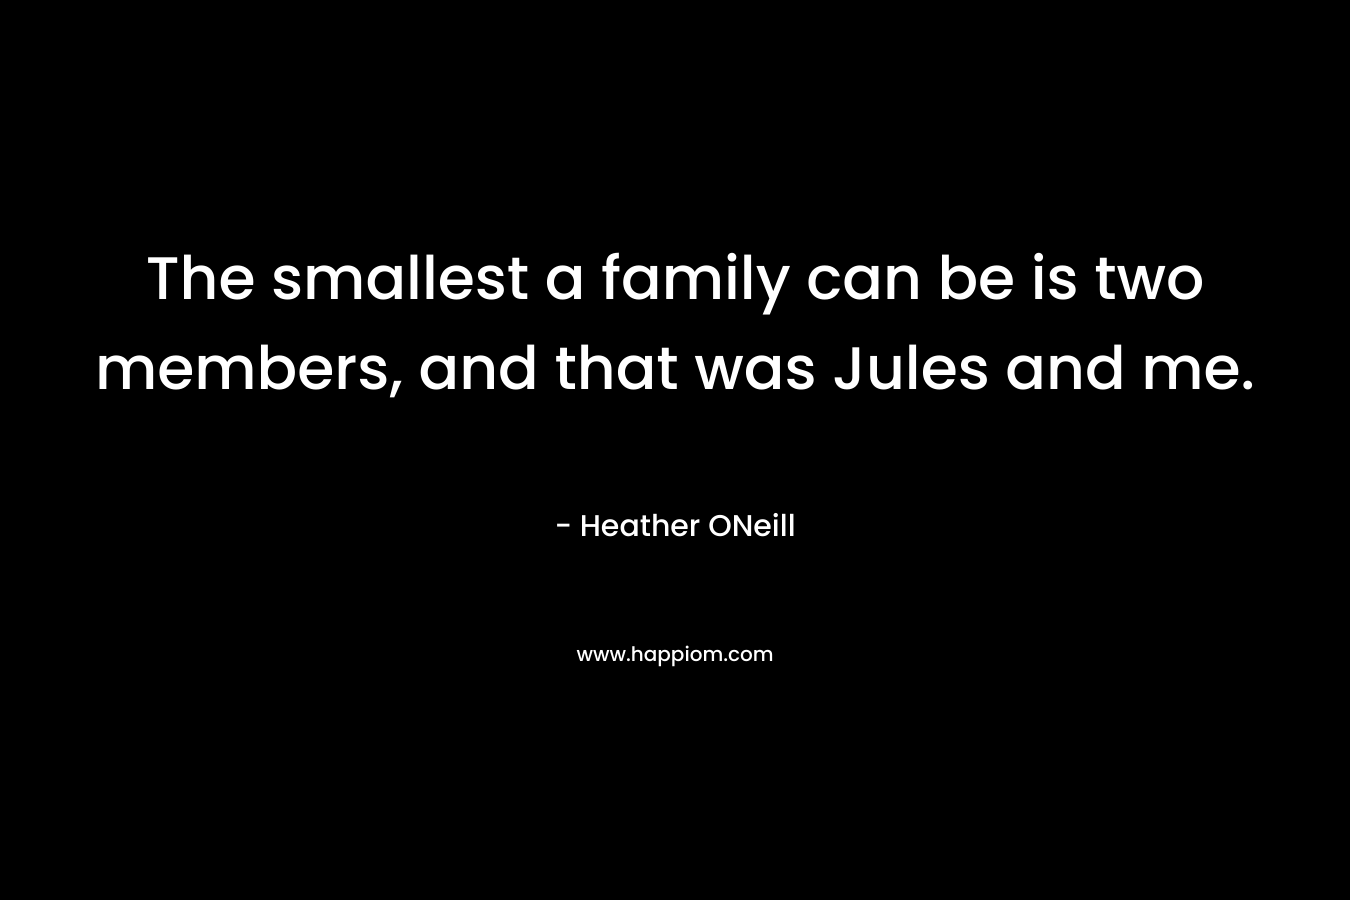 The smallest a family can be is two members, and that was Jules and me. – Heather ONeill